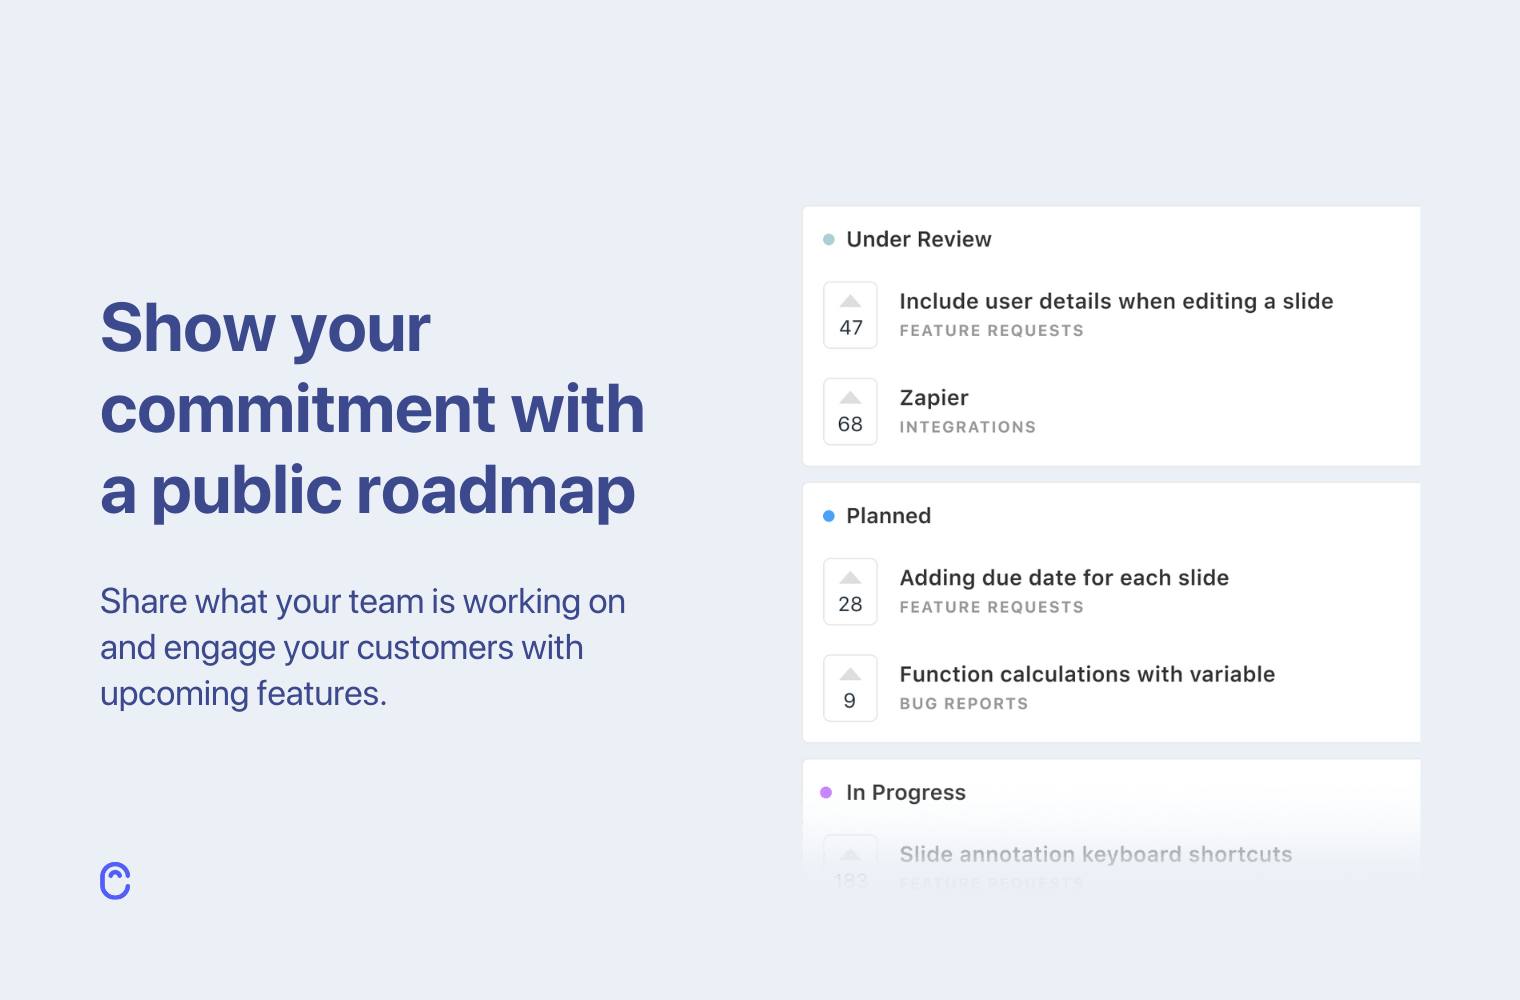 Share what your team is working on and engage your customers with upcoming features.